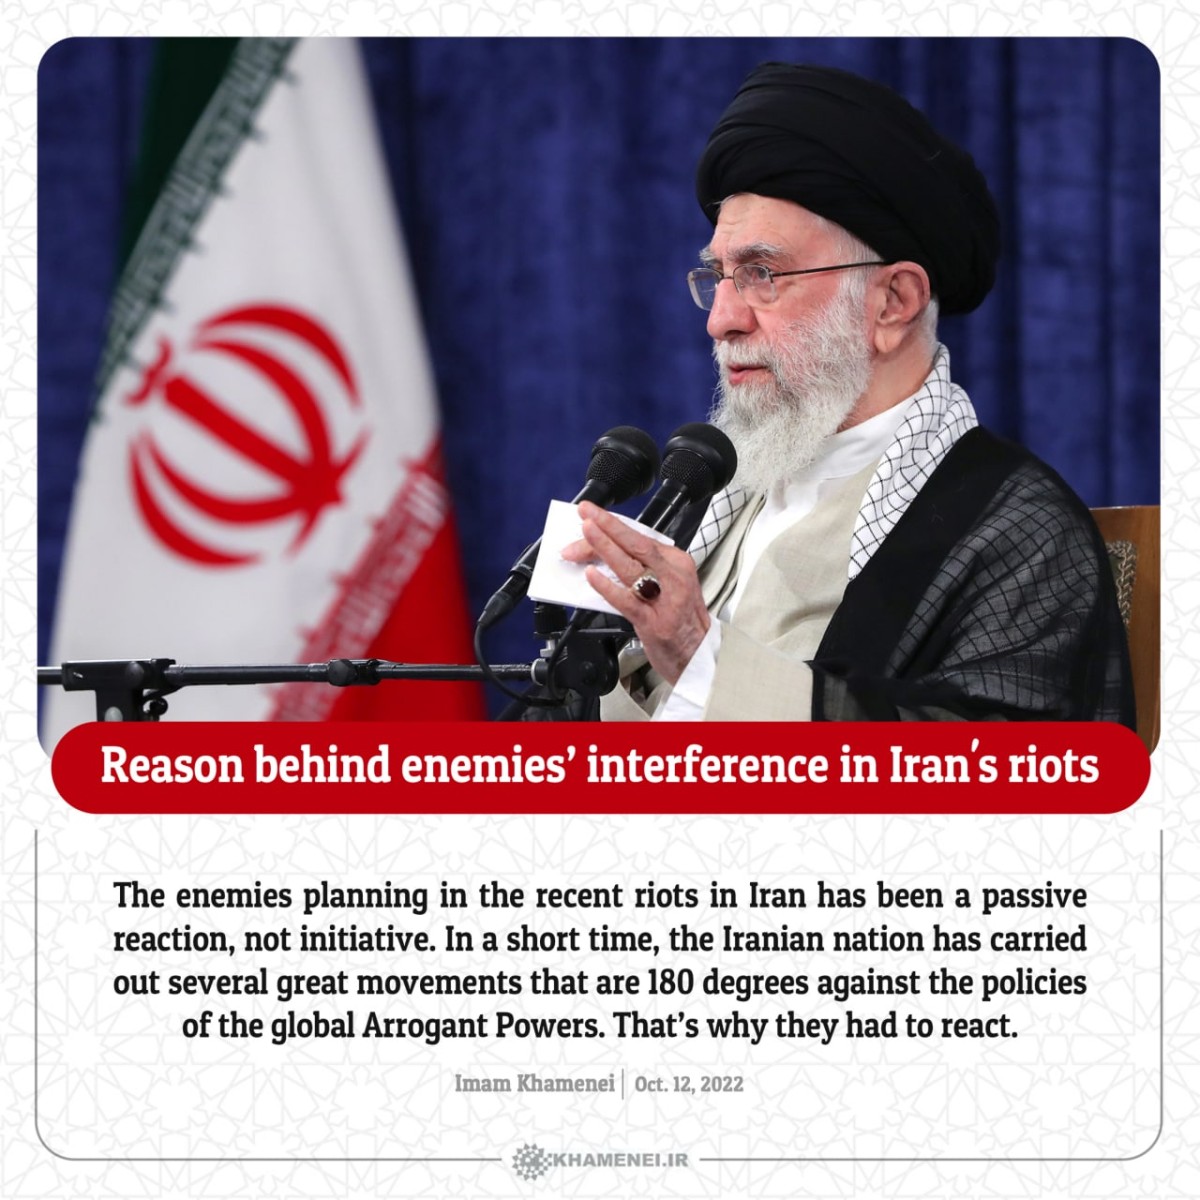 Reason behind enemies’ interference in Iran's riots